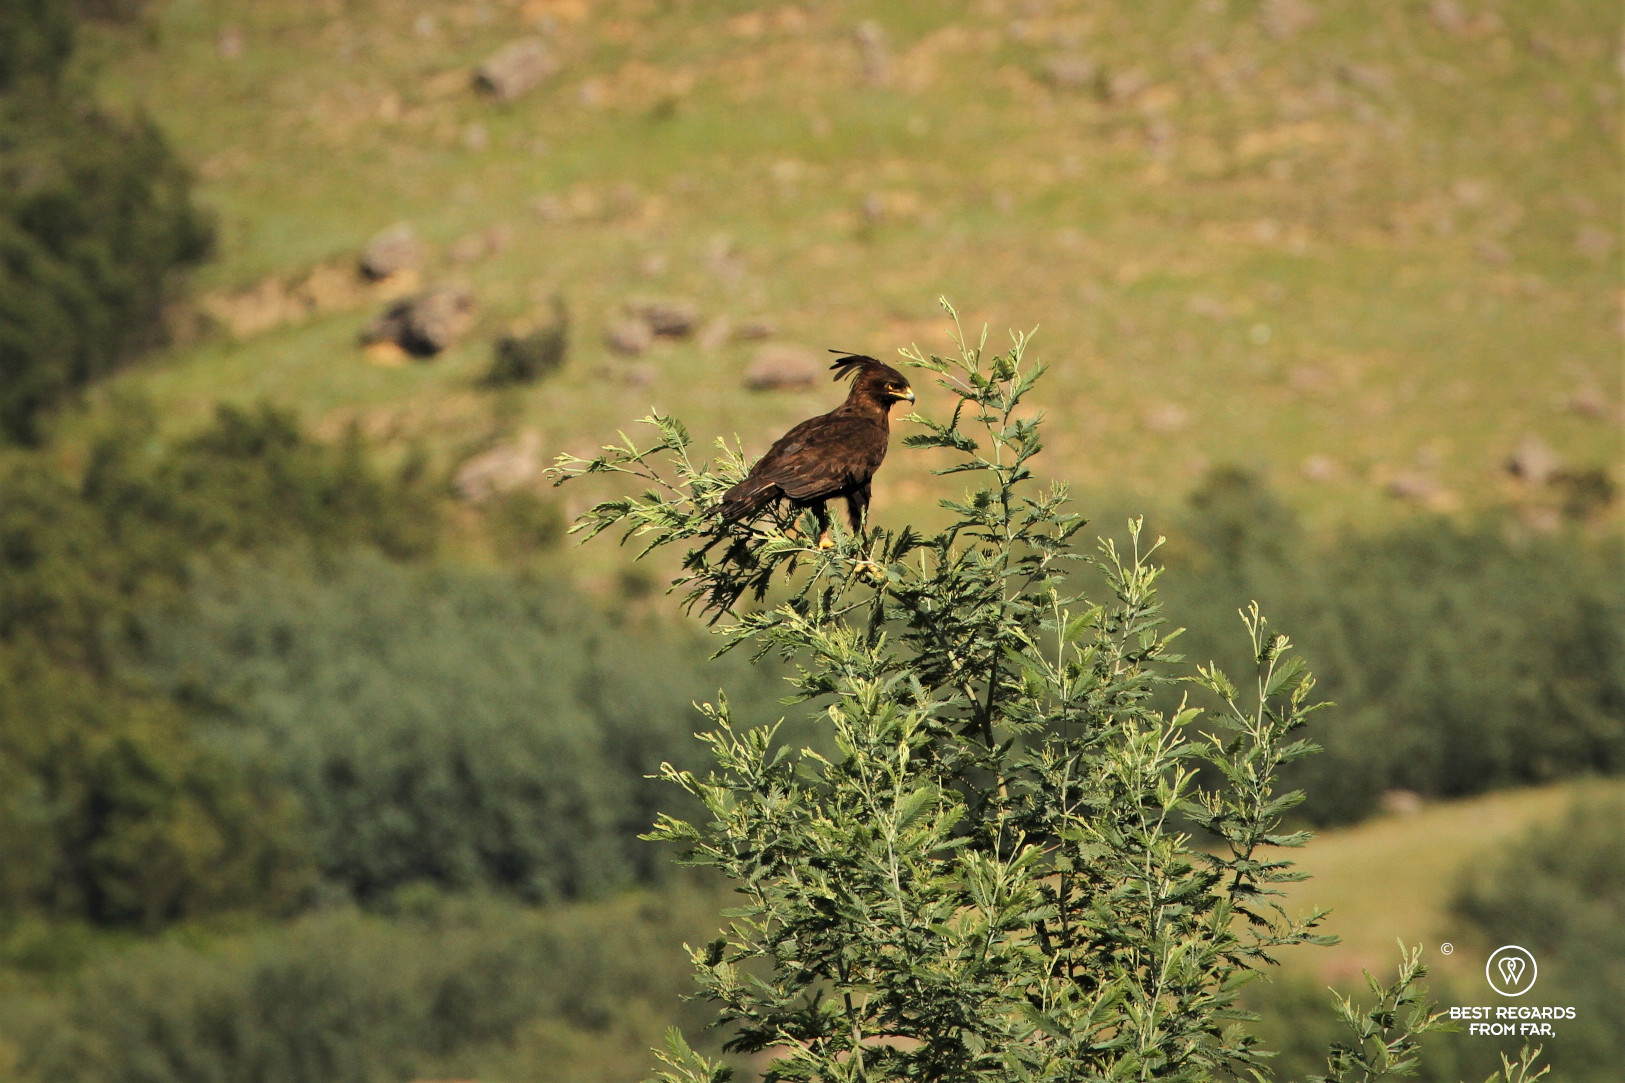 Long-crested eagle up in a tree with a green mountain in the background.